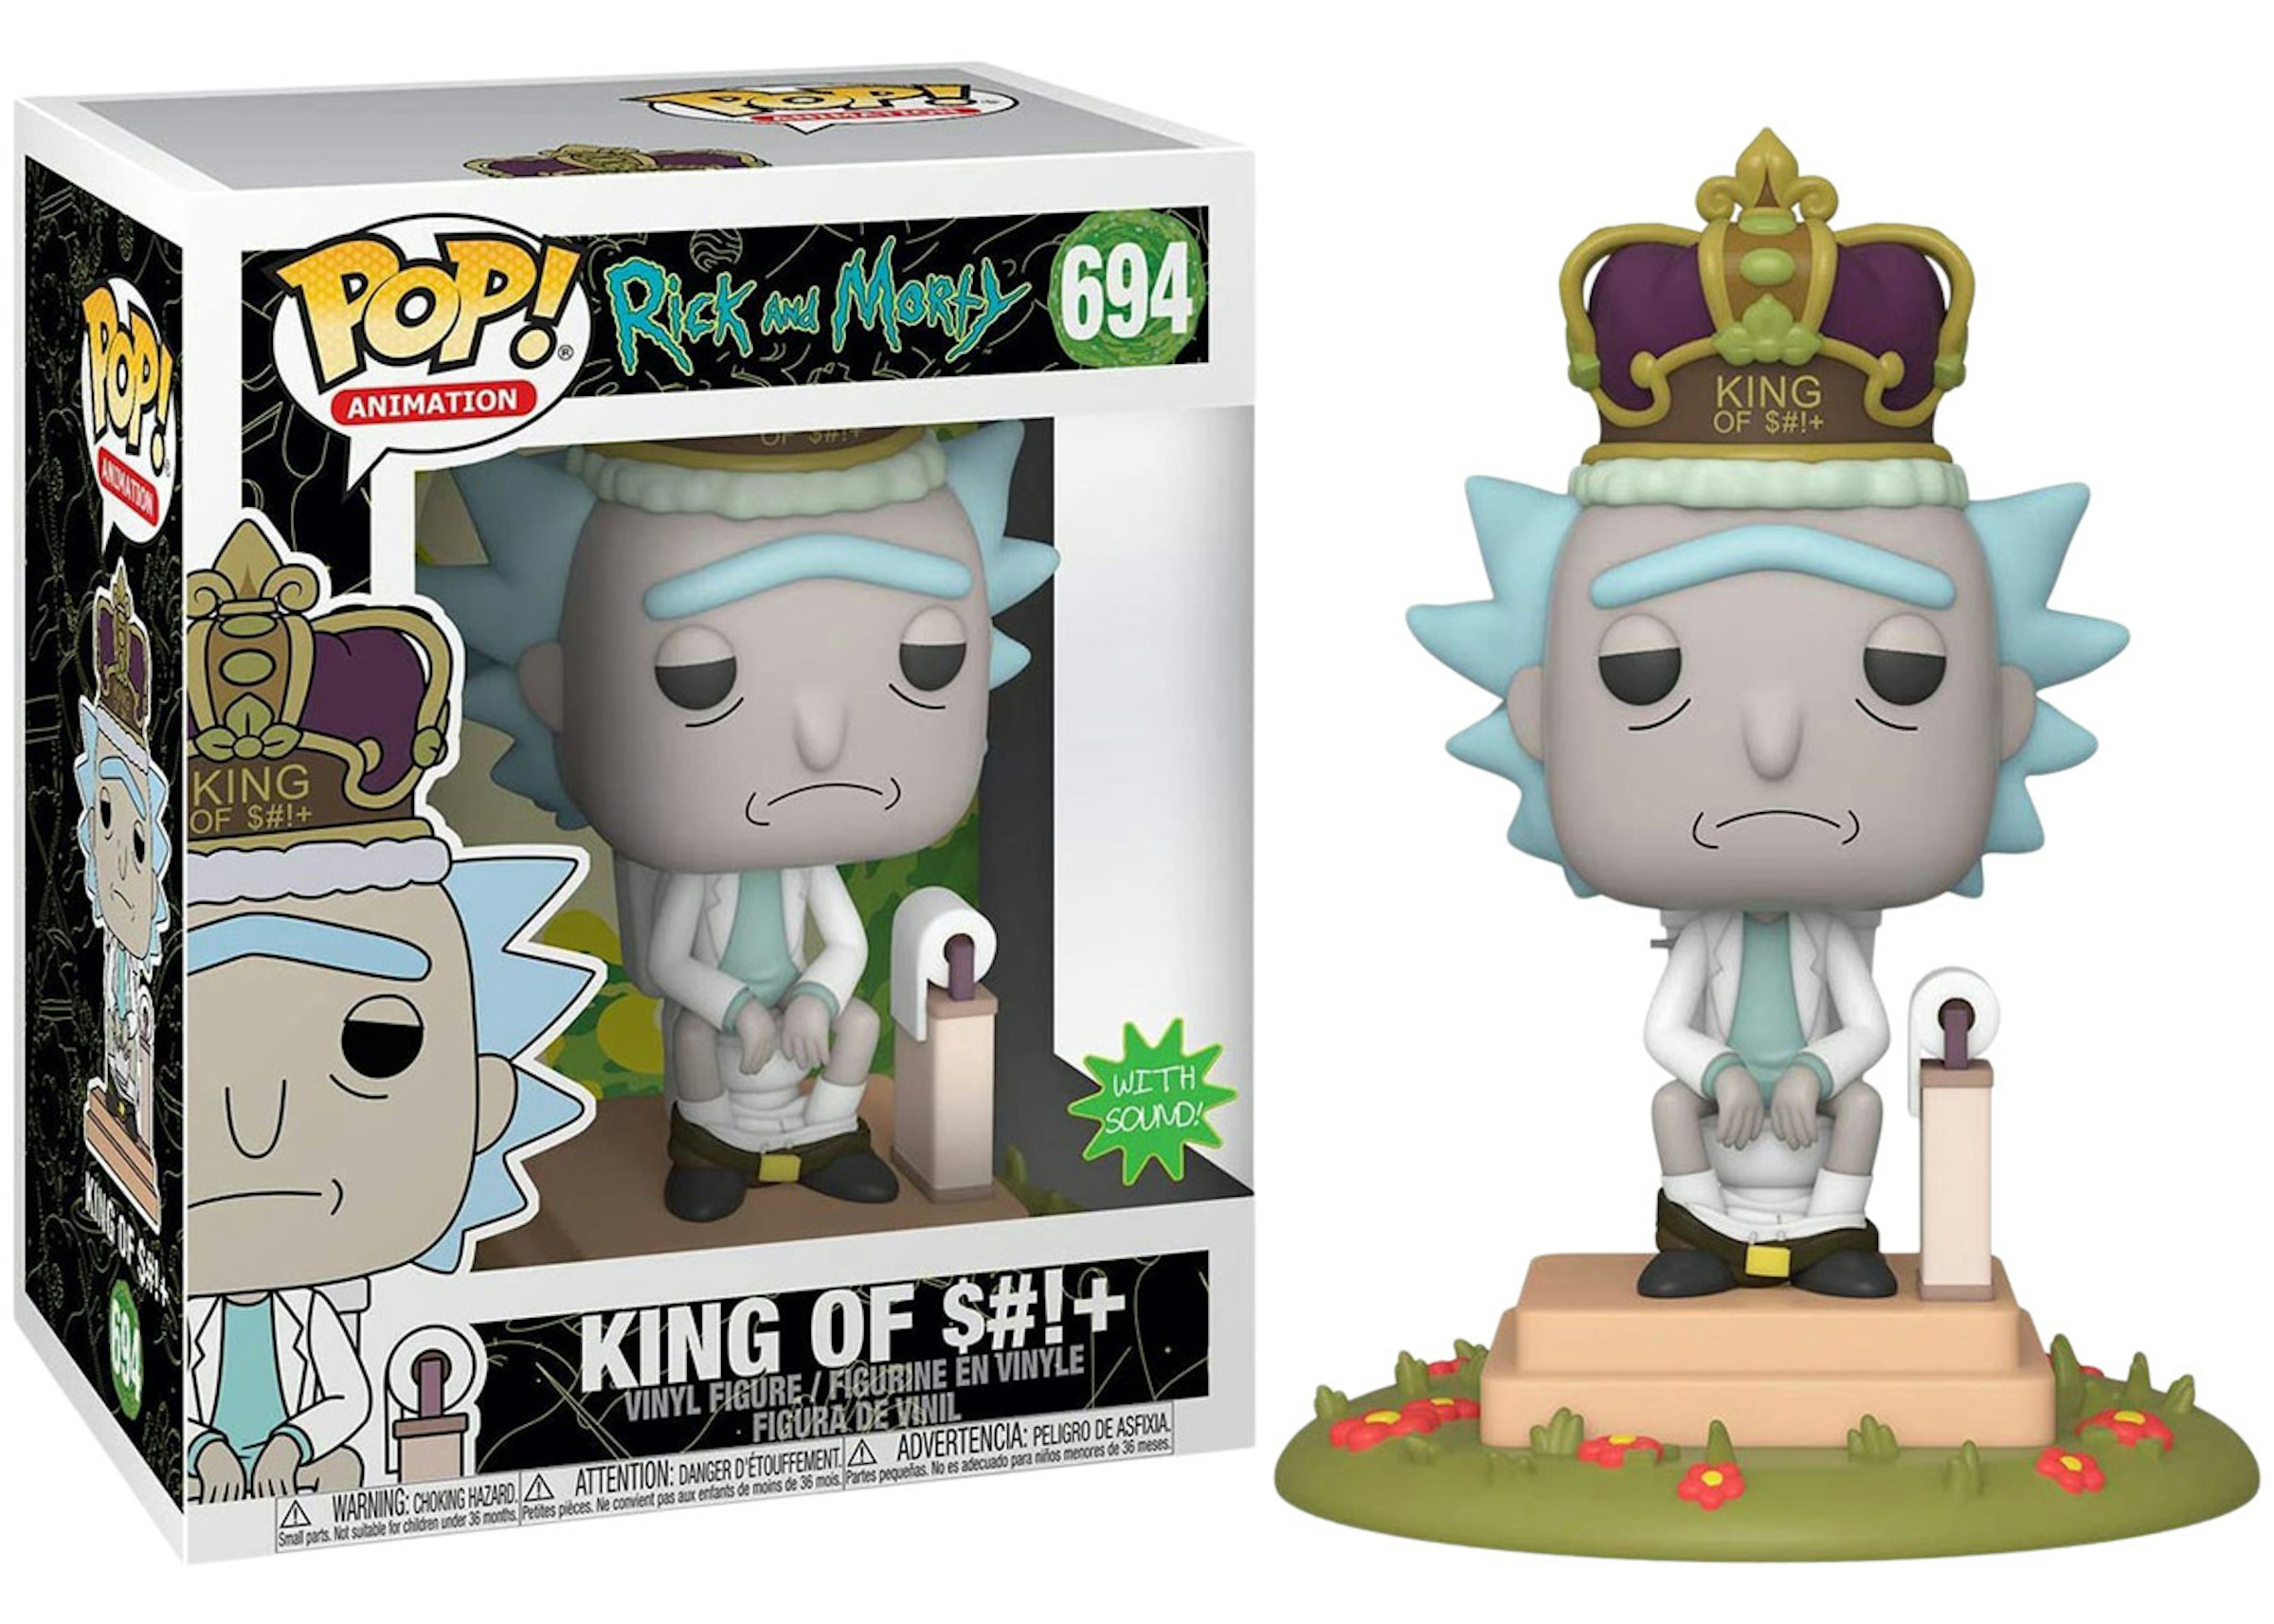 Pop! Animation Rick & Morty King of $#!+ with Sound Figure #694 - US